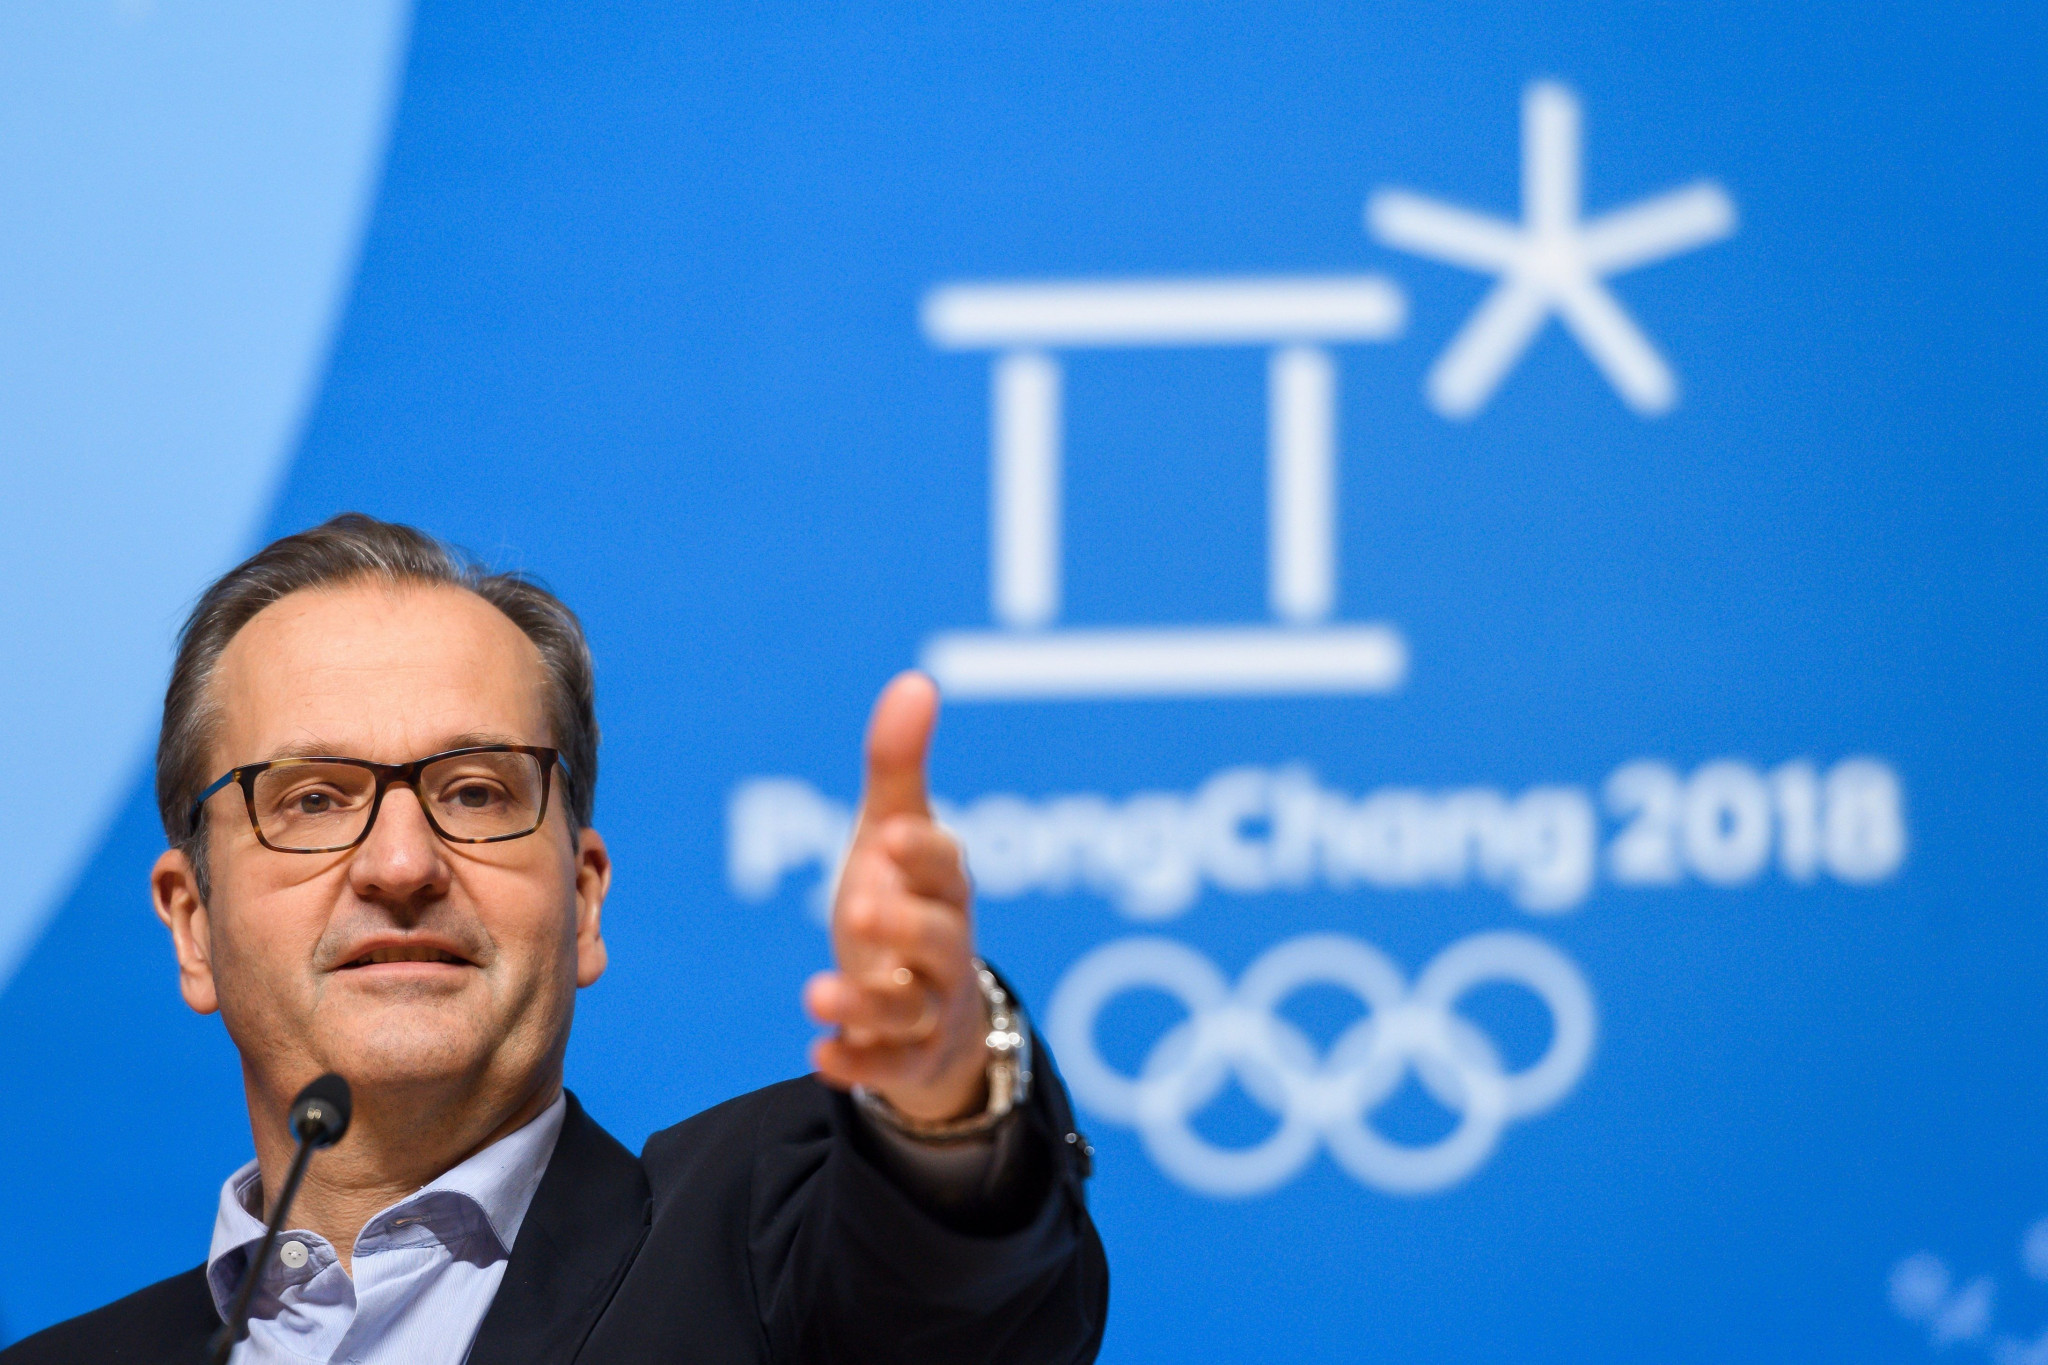 IOC spokesperson Mark Adams spoke after the opening day of an Executive Board meeting ©Getty Images